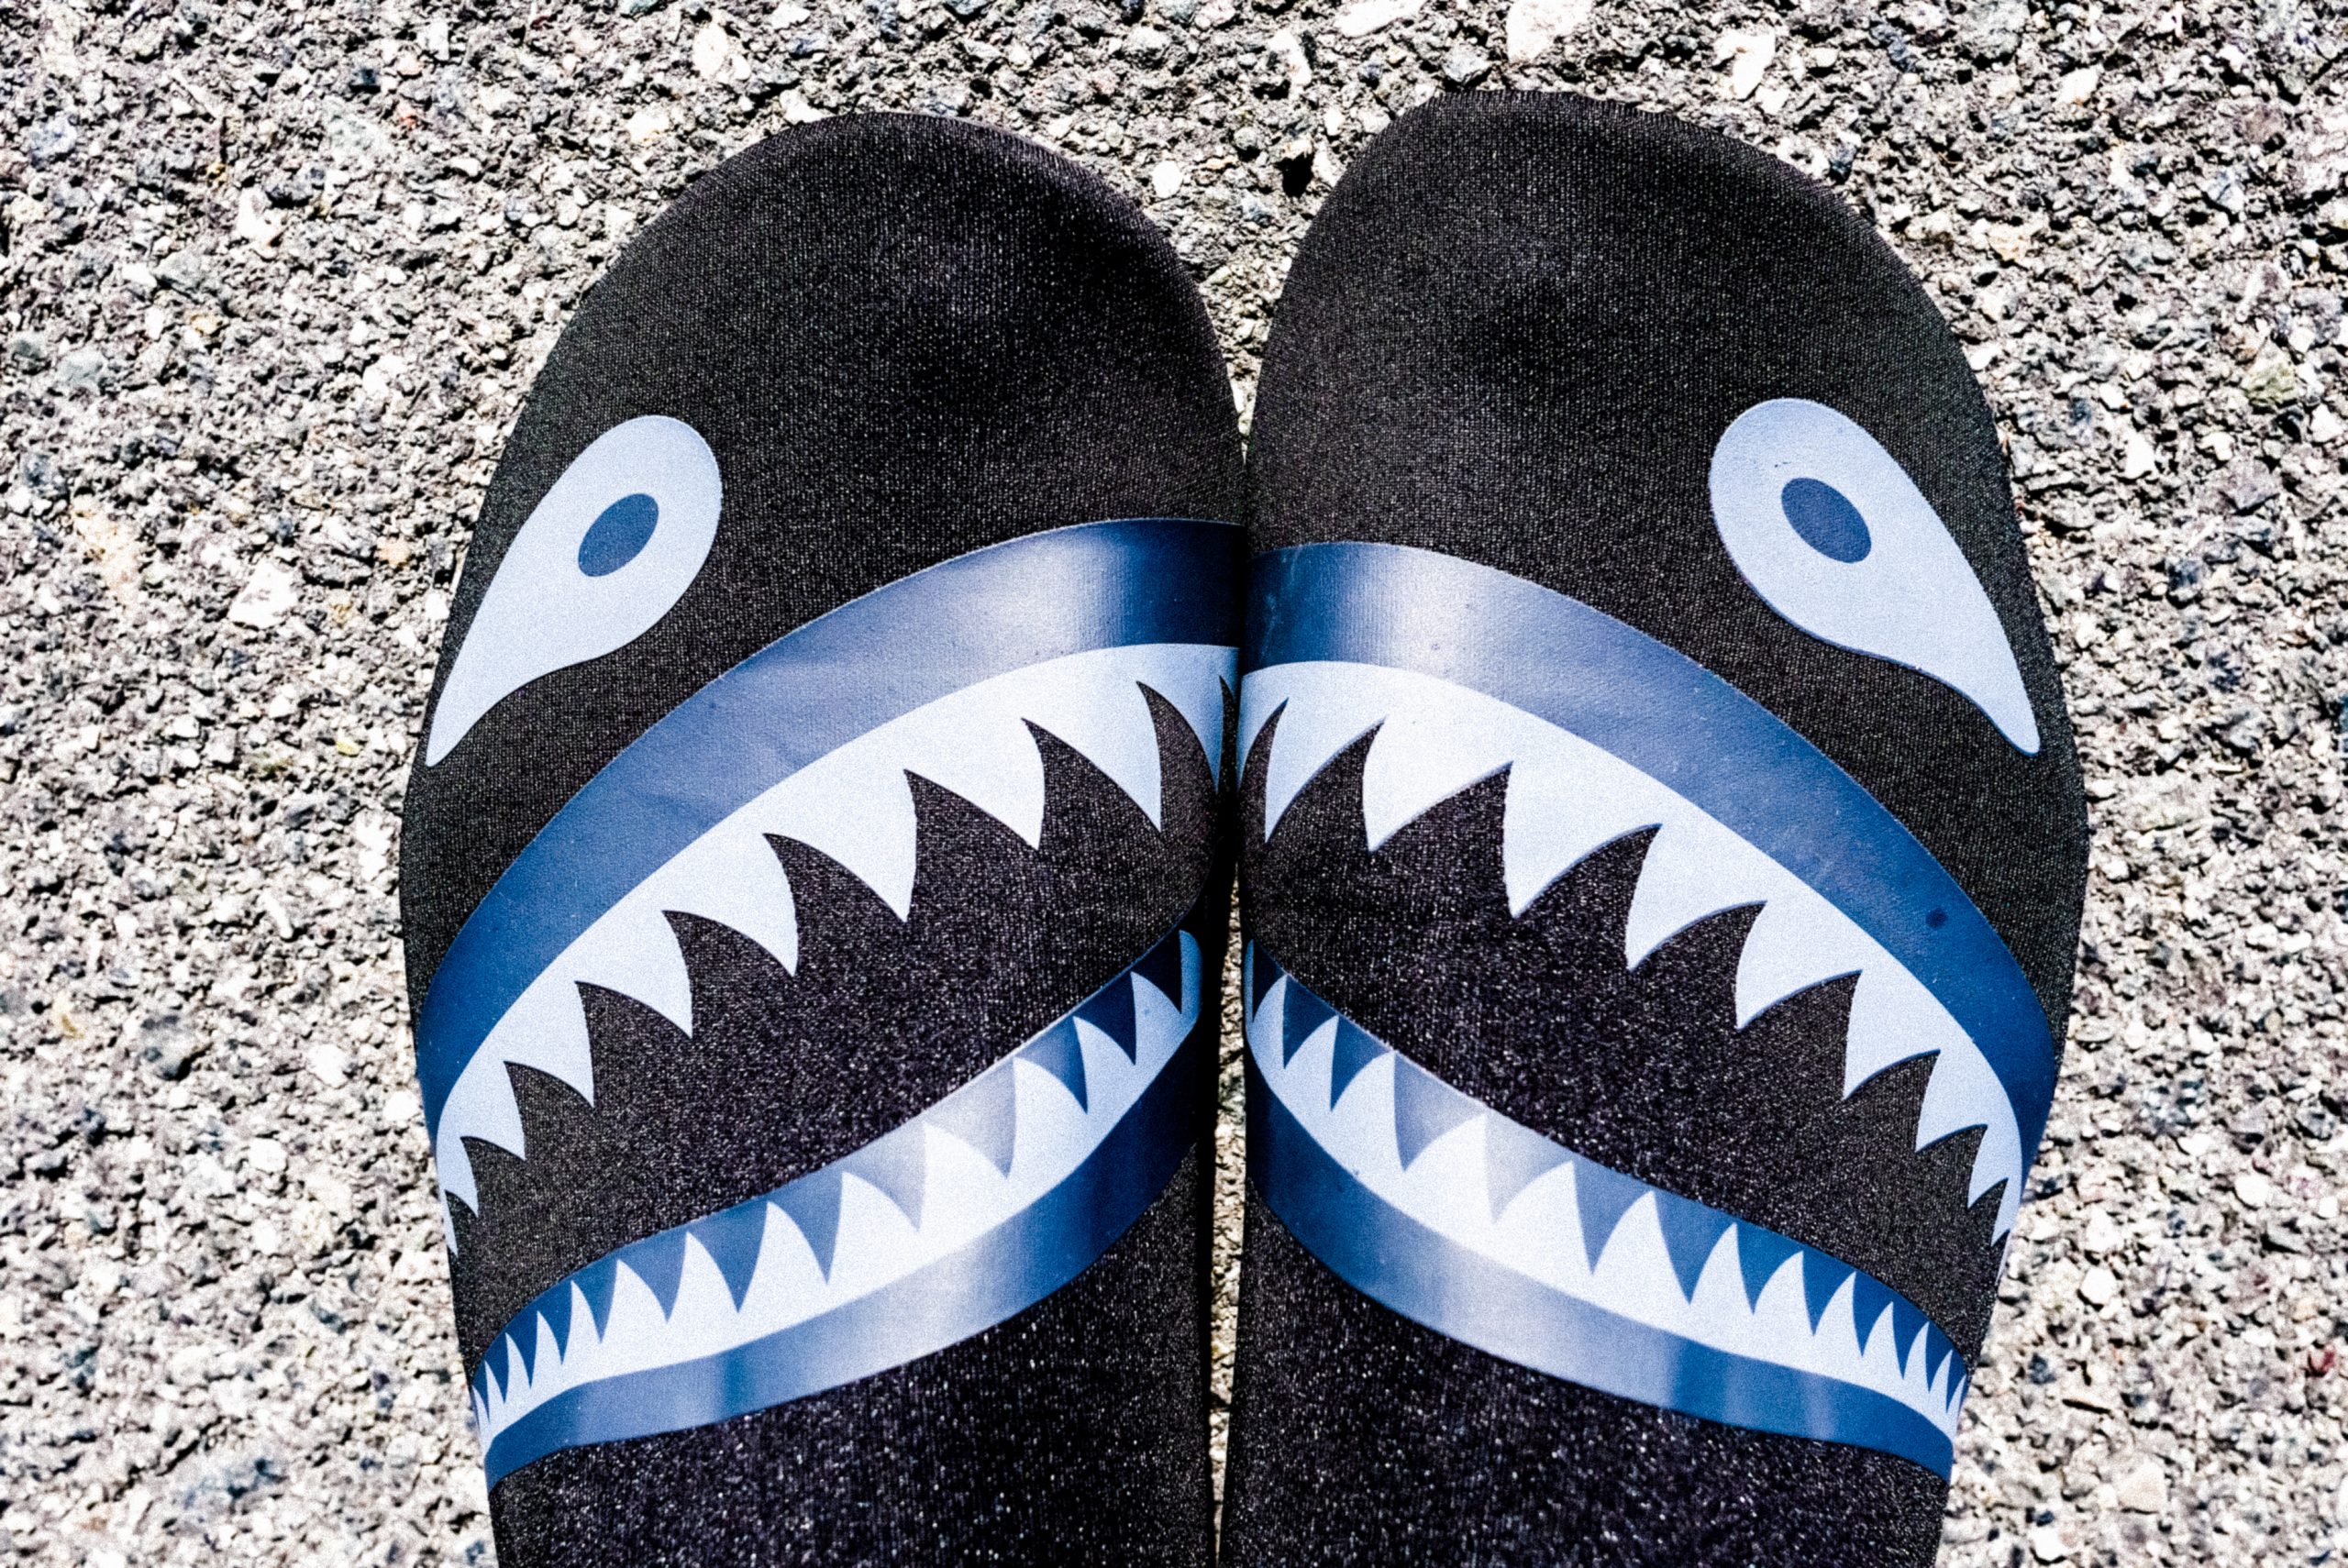 My new Shark shoes (water shoes from Amazon, only $15)